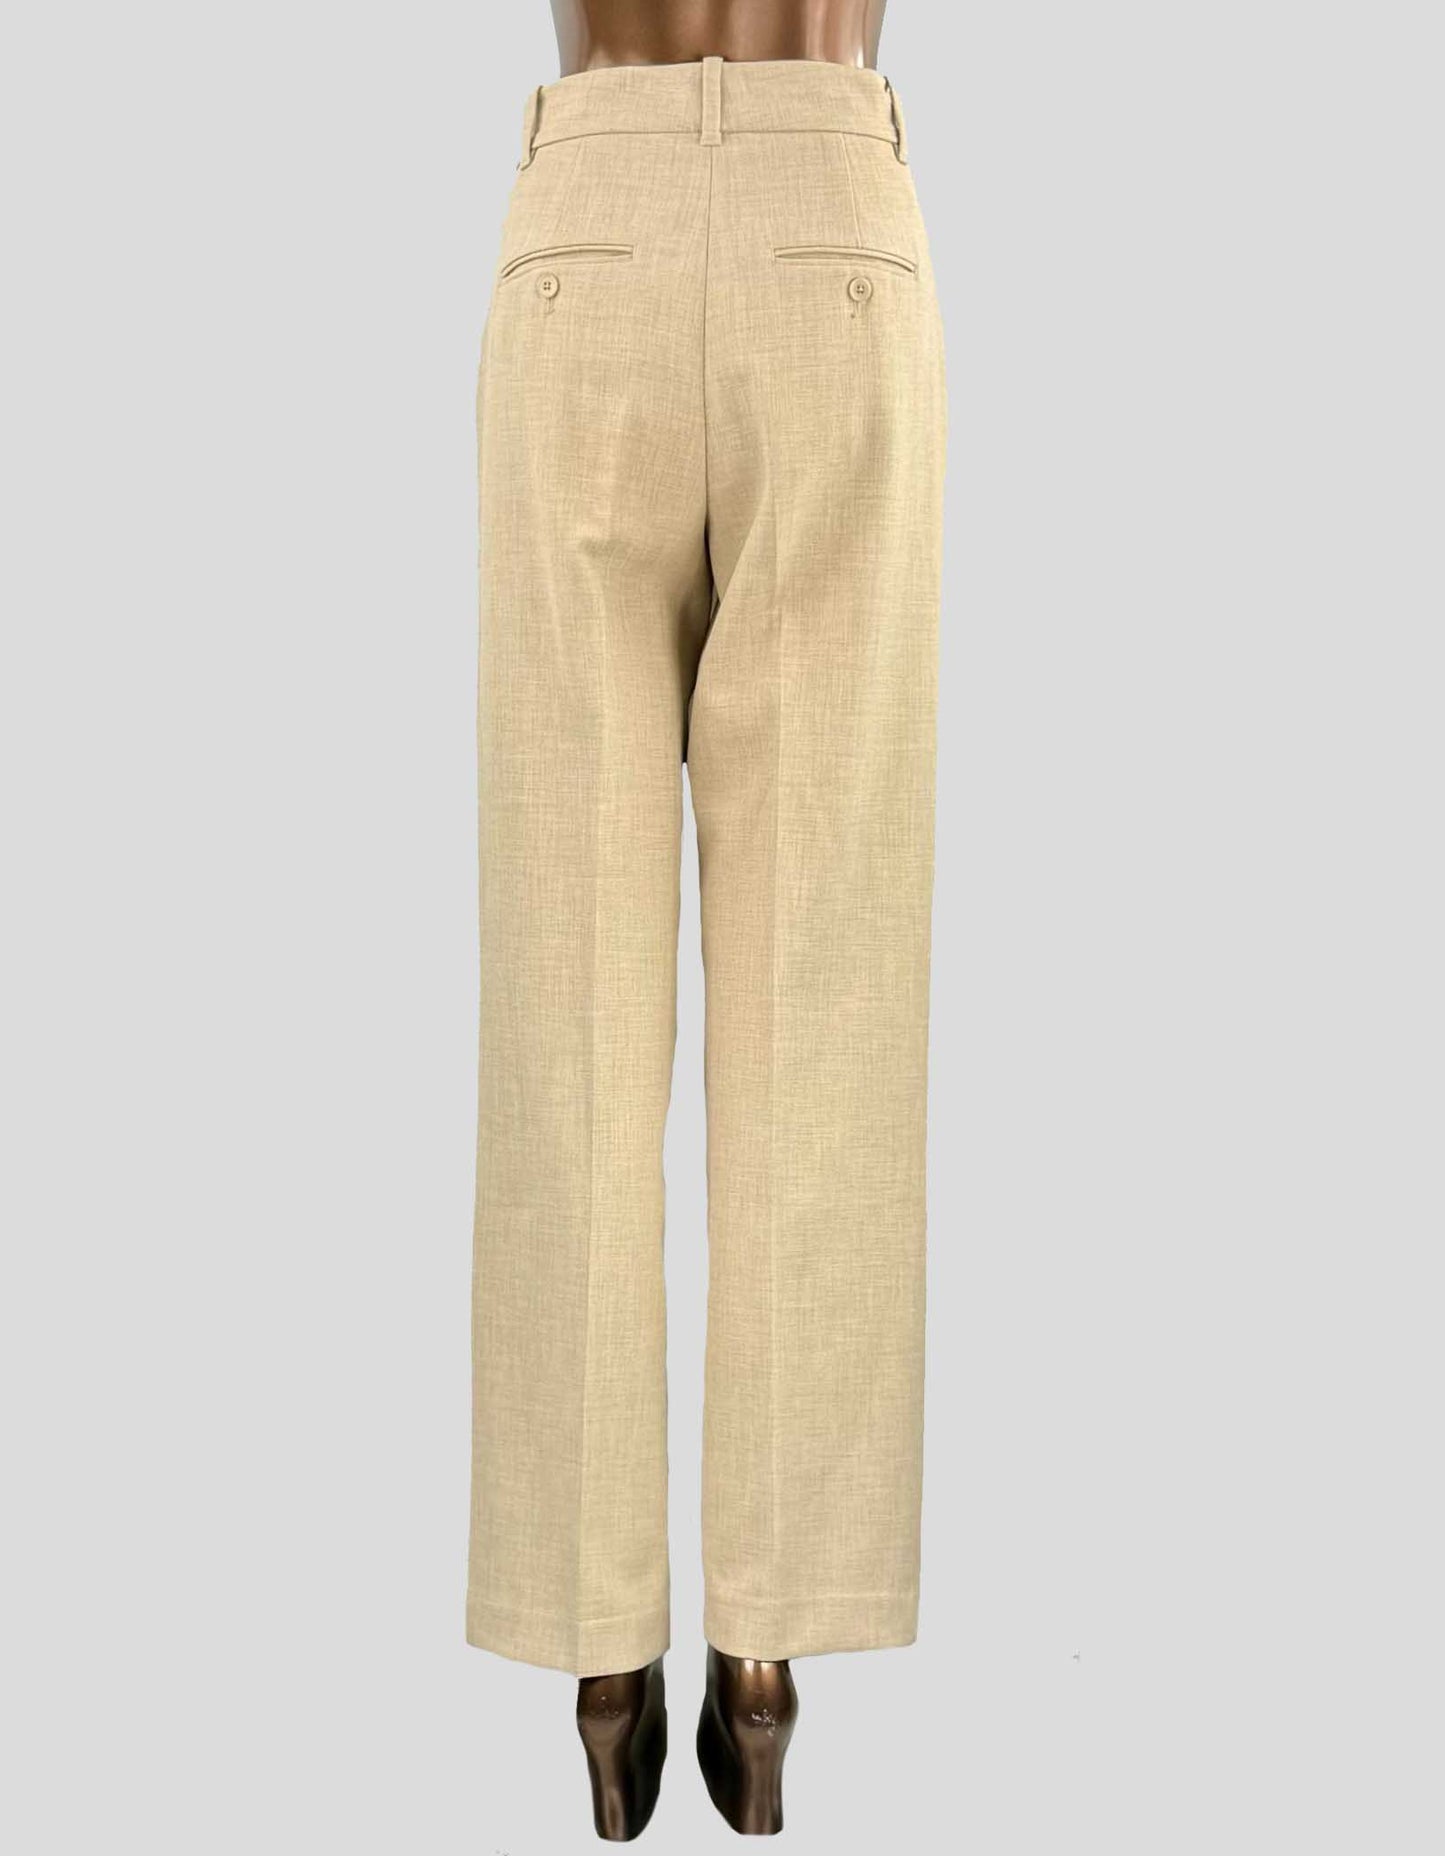 WILFRED the Effortless Pant Trousers - 6 US